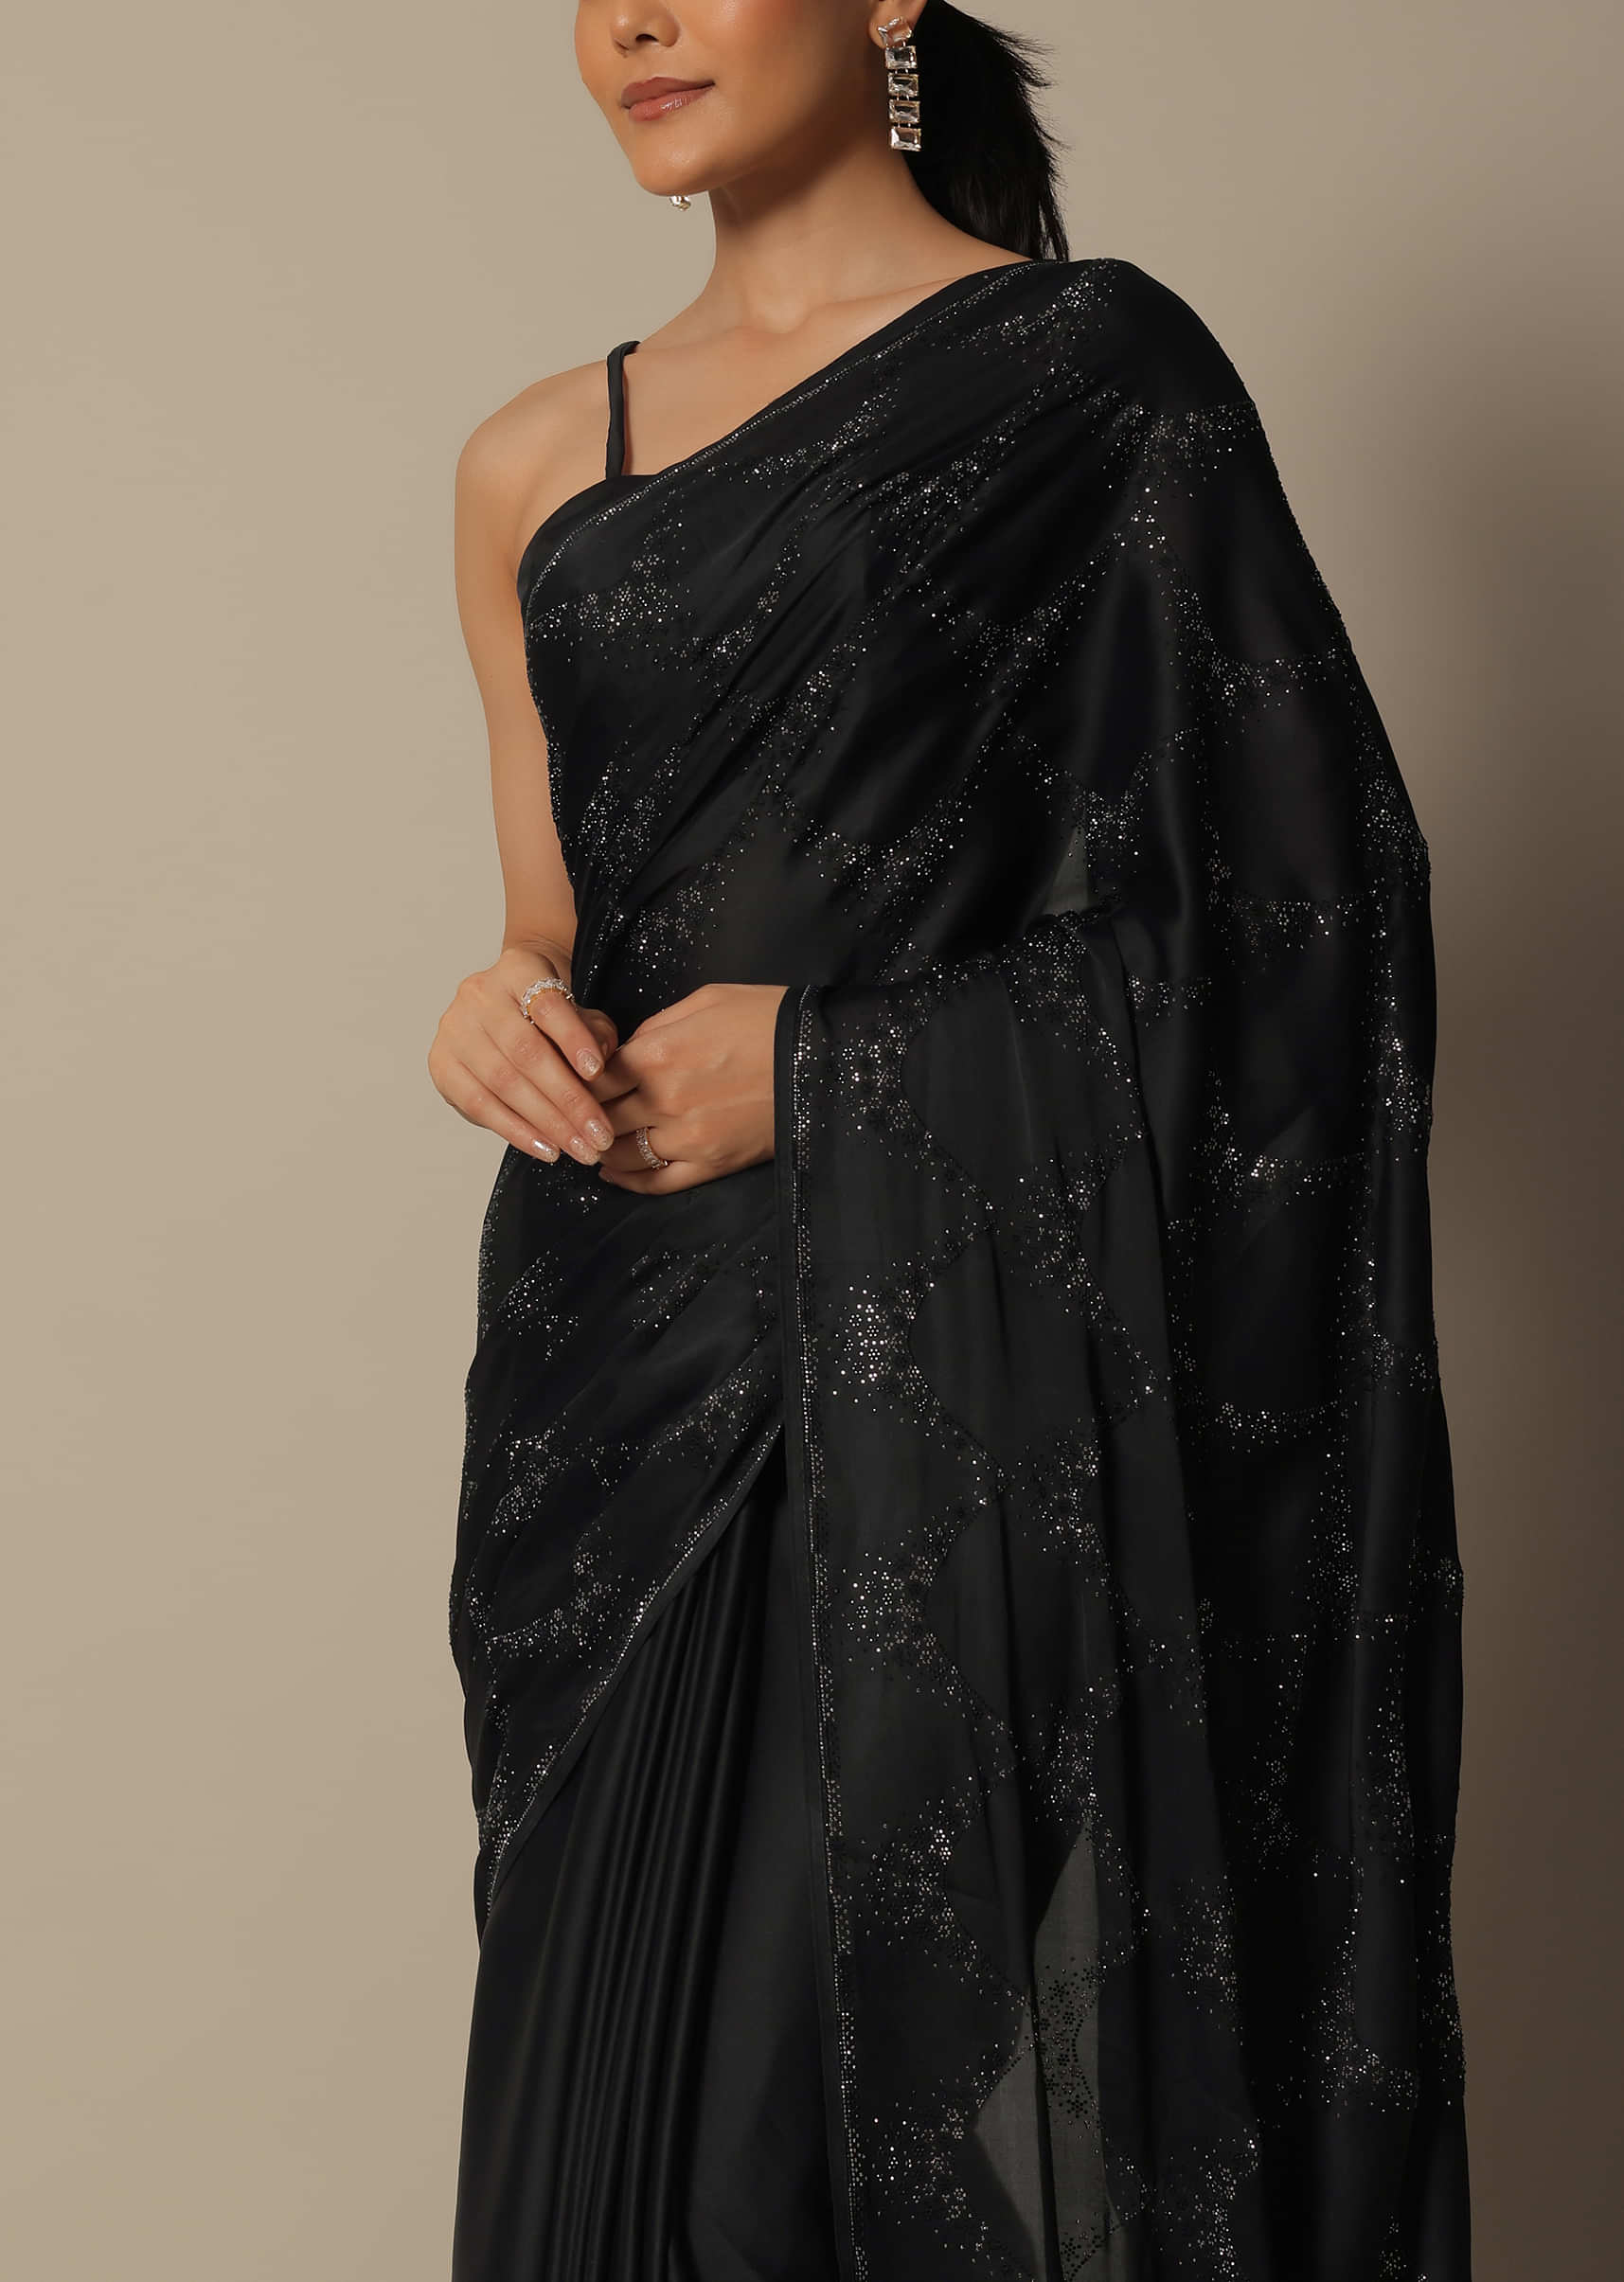 Free Shipping Black Saree Contour - Available In 2 Sizes Buy Now